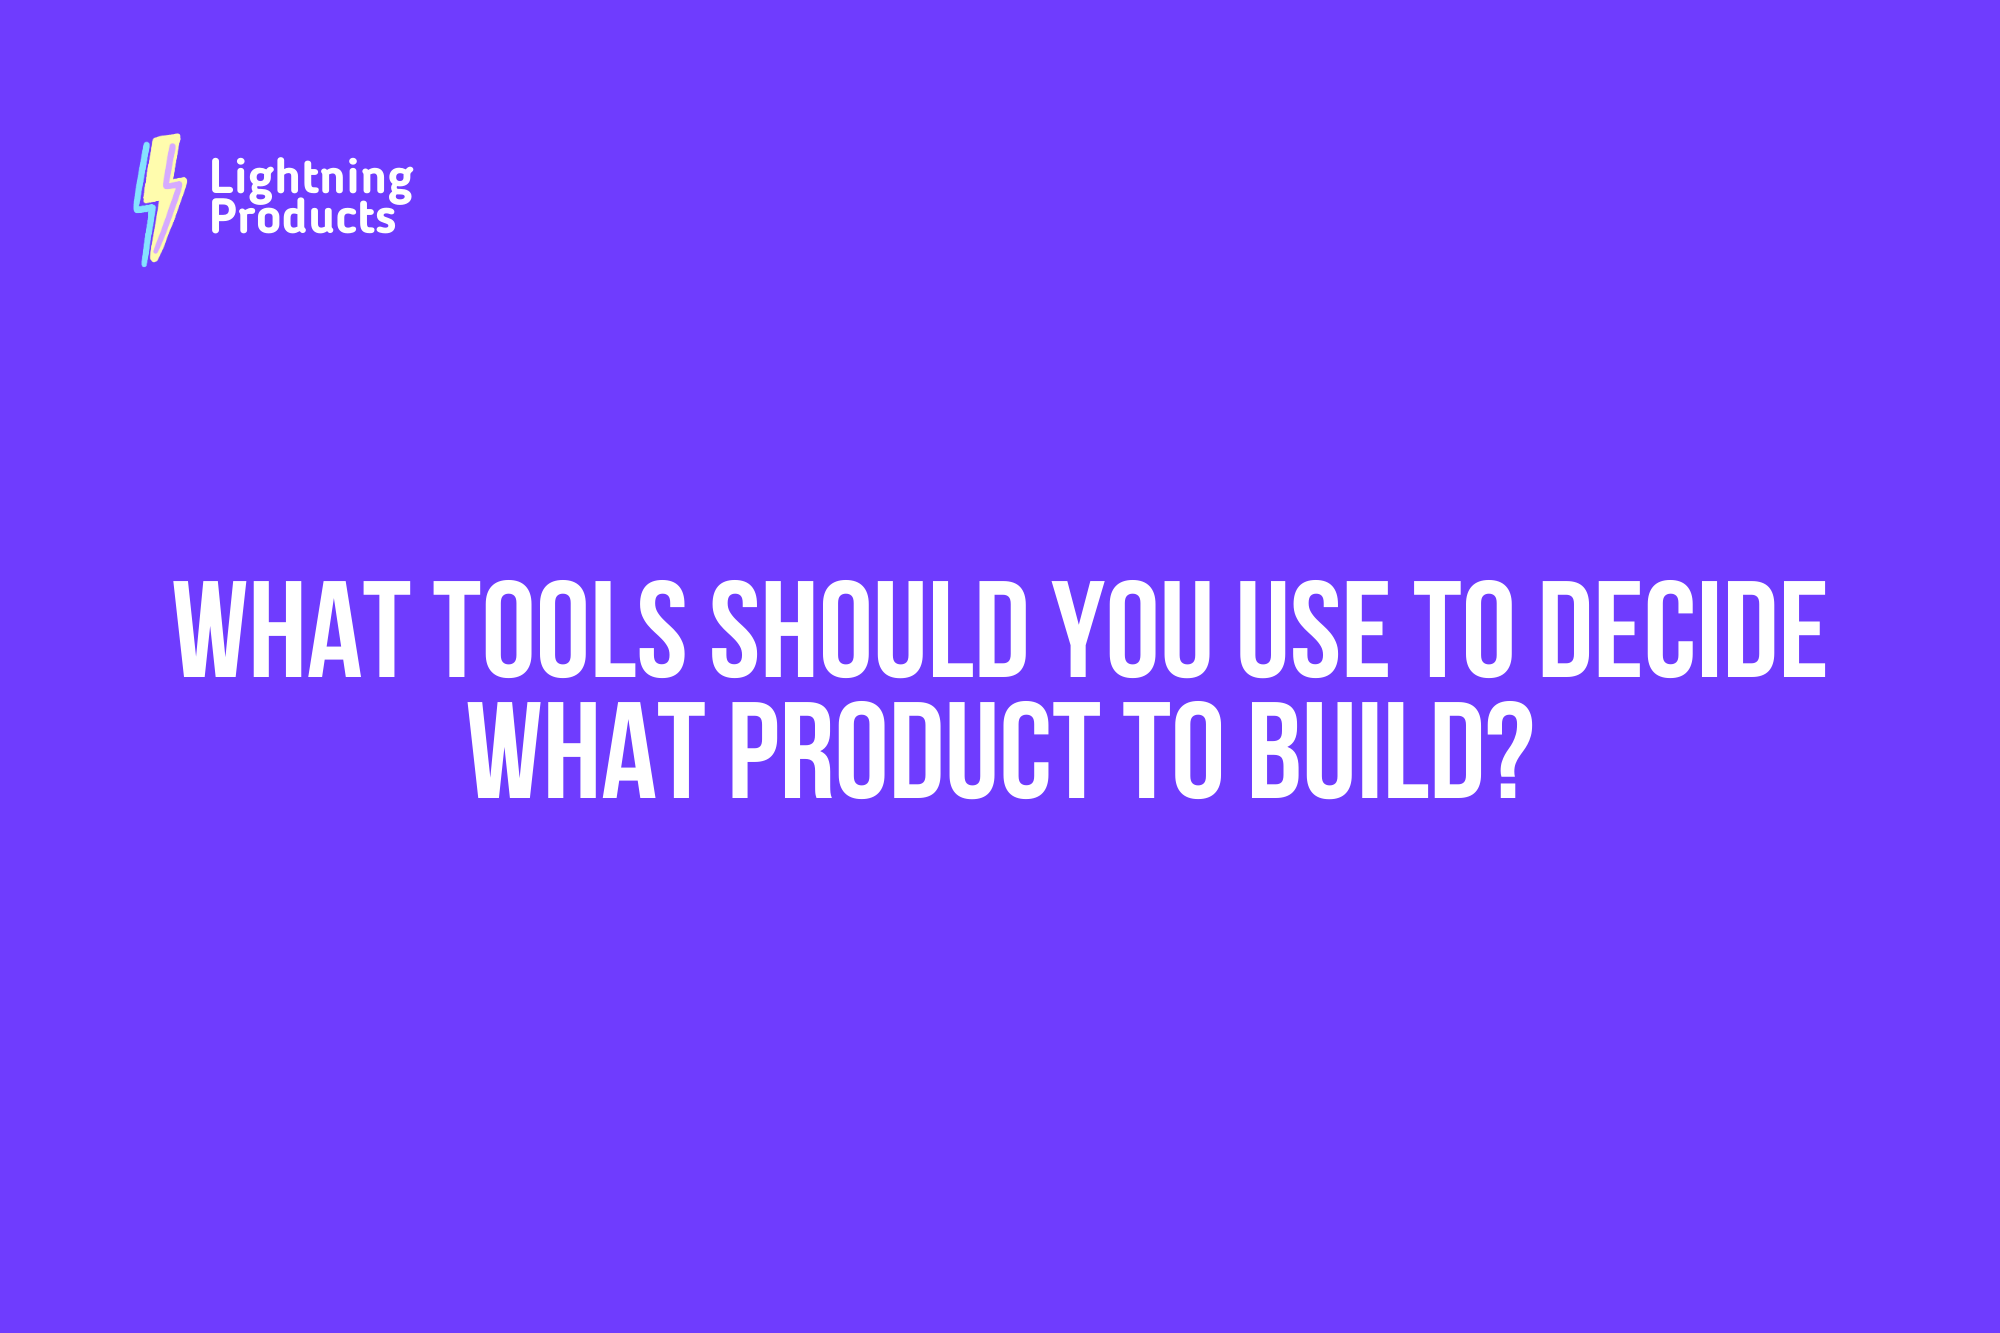 What Tools Should You Use to Decide What Product to Build